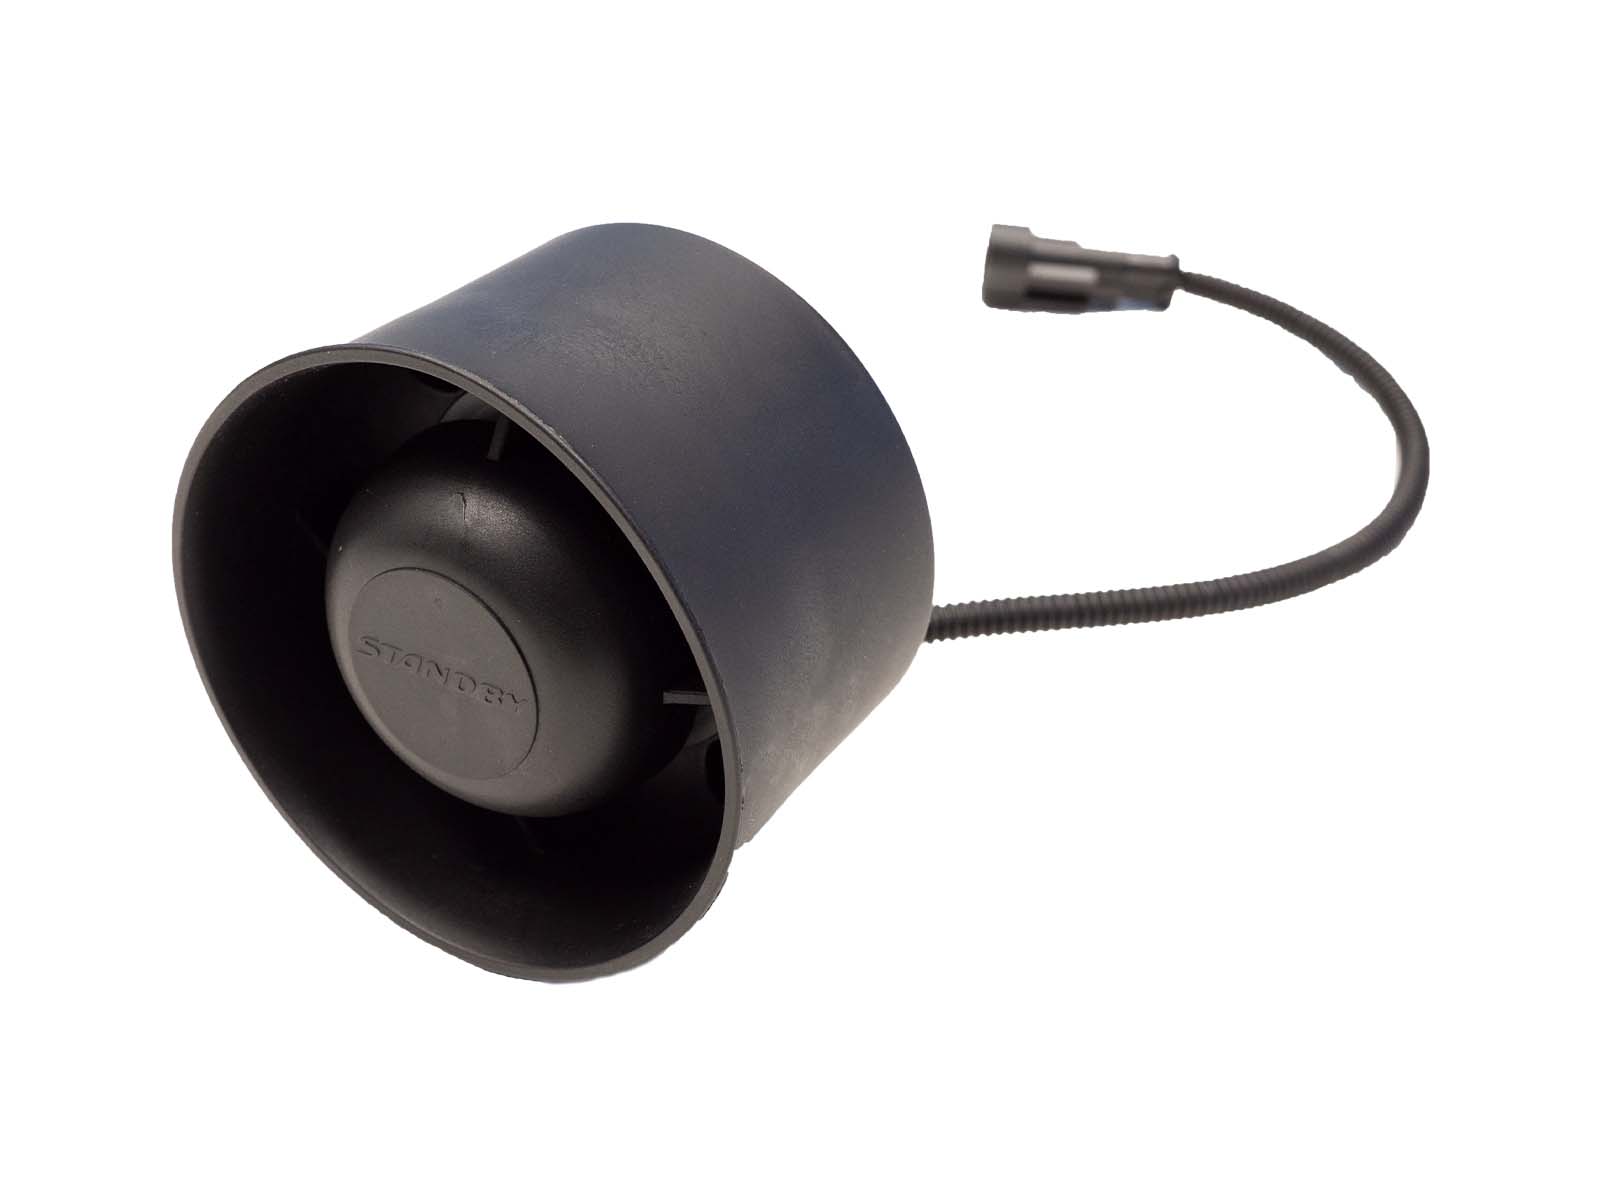 K-SR 350 Loudspeaker Angle View with Cable